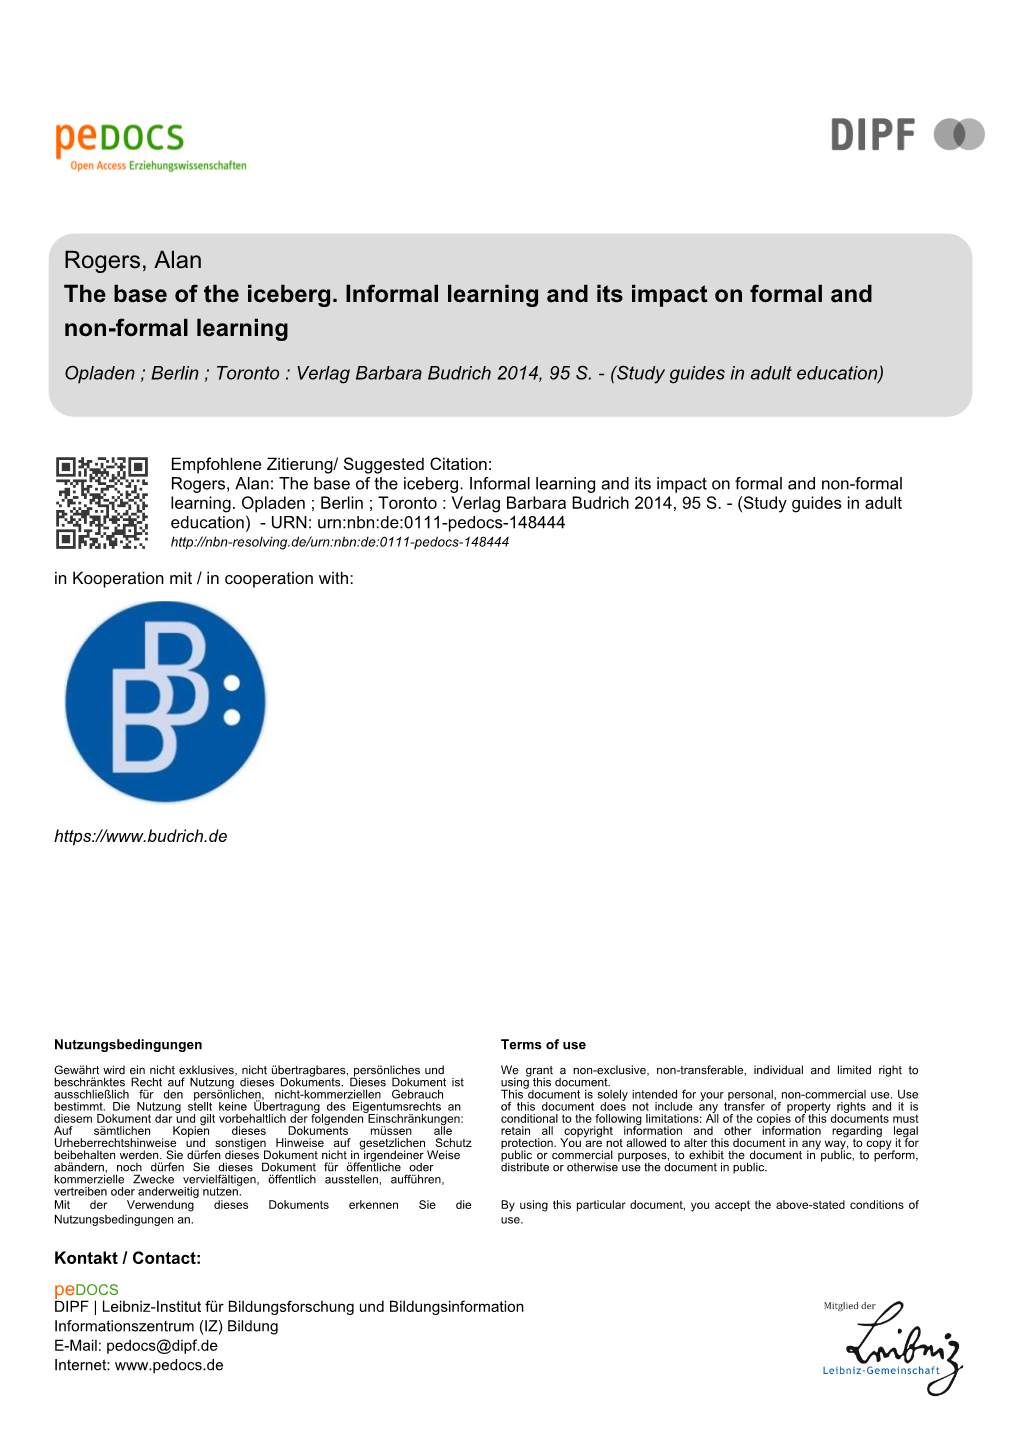 The Base of the Iceberg. Informal Learning and Its Impact on Formal and Non-Formal Learning